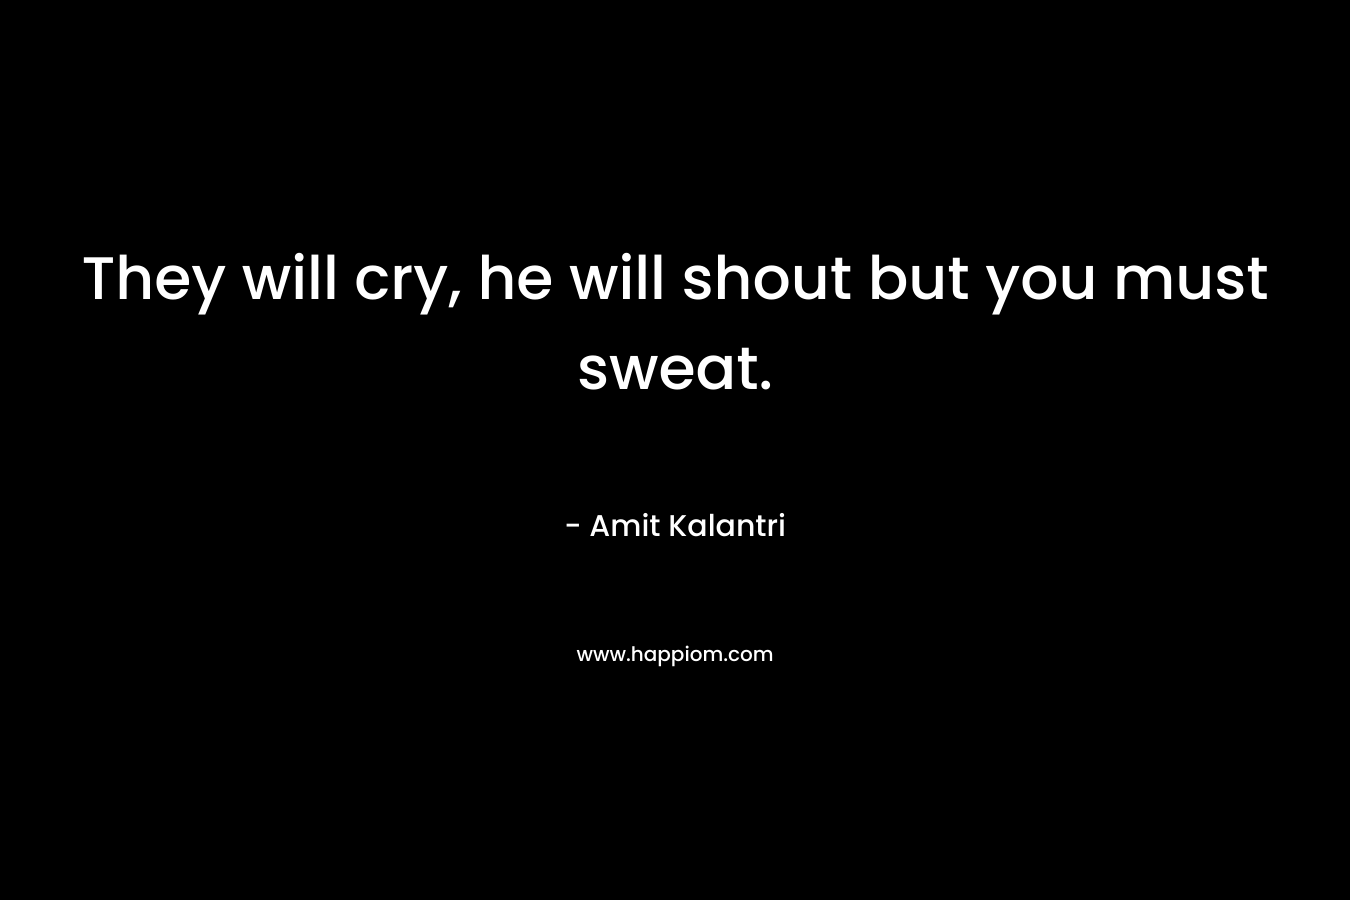 They will cry, he will shout but you must sweat.